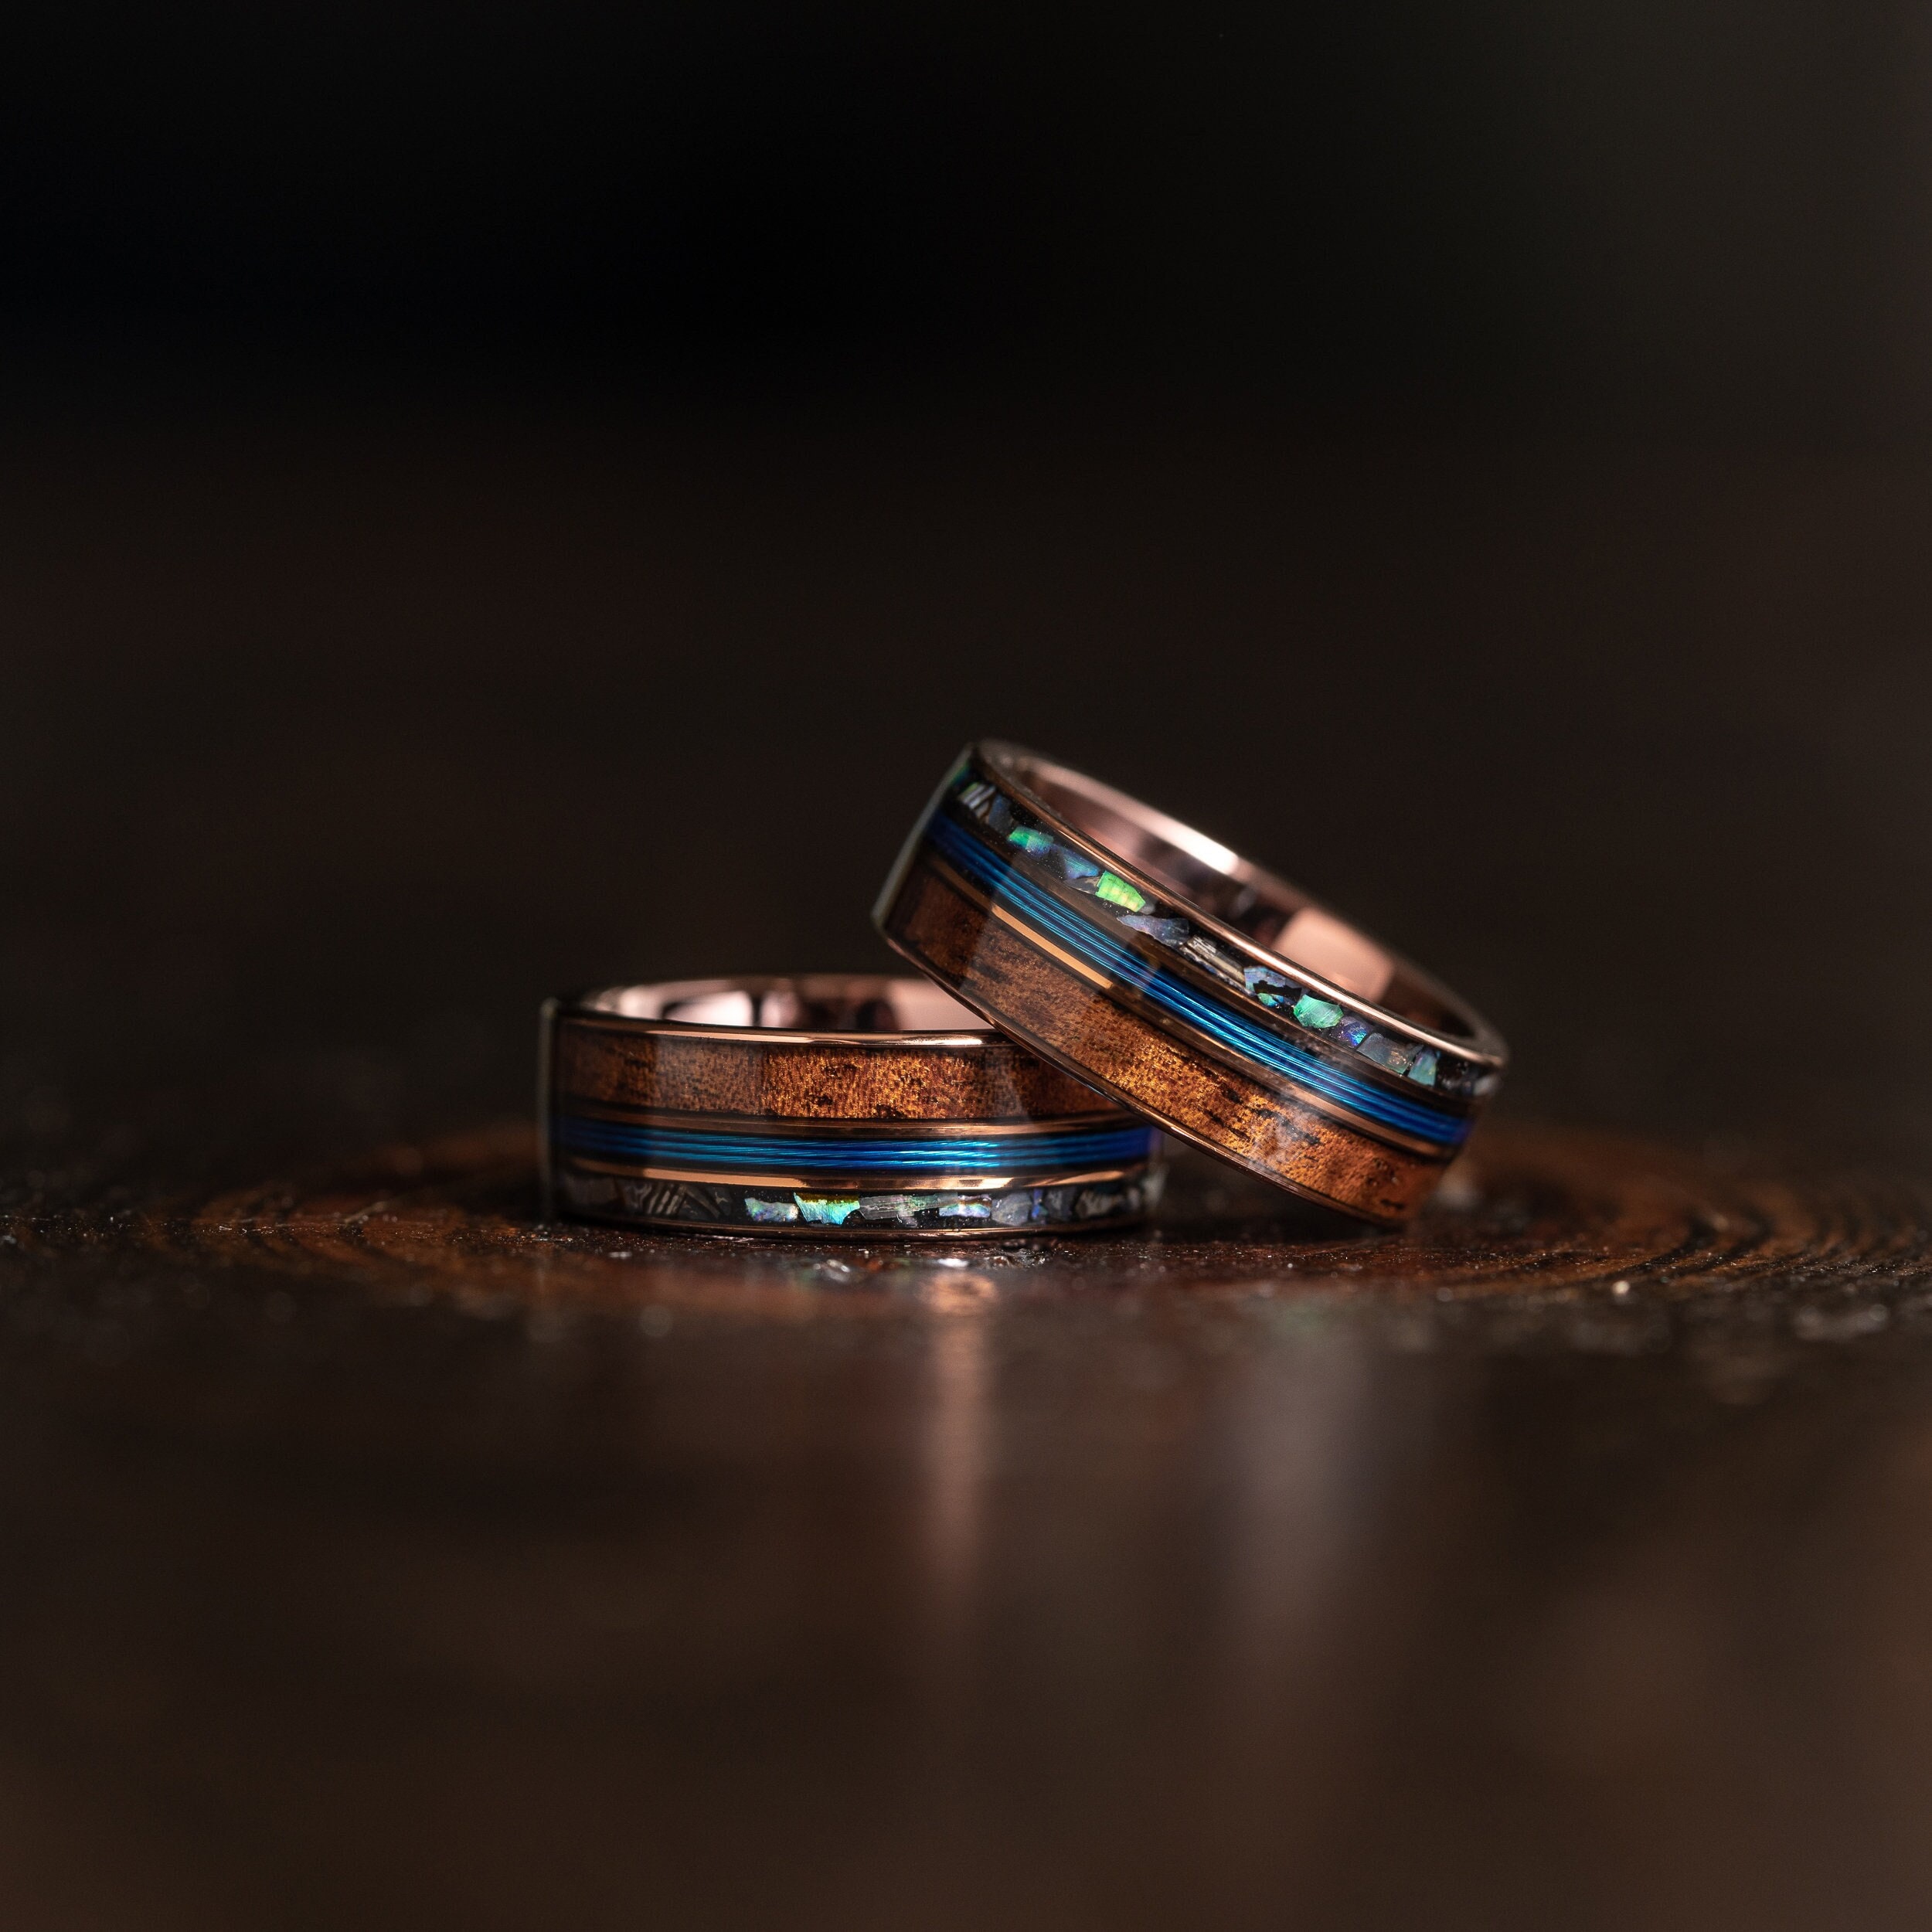 Fishing Line Ring With Koa Wood and Abalone, Fishing String Ring